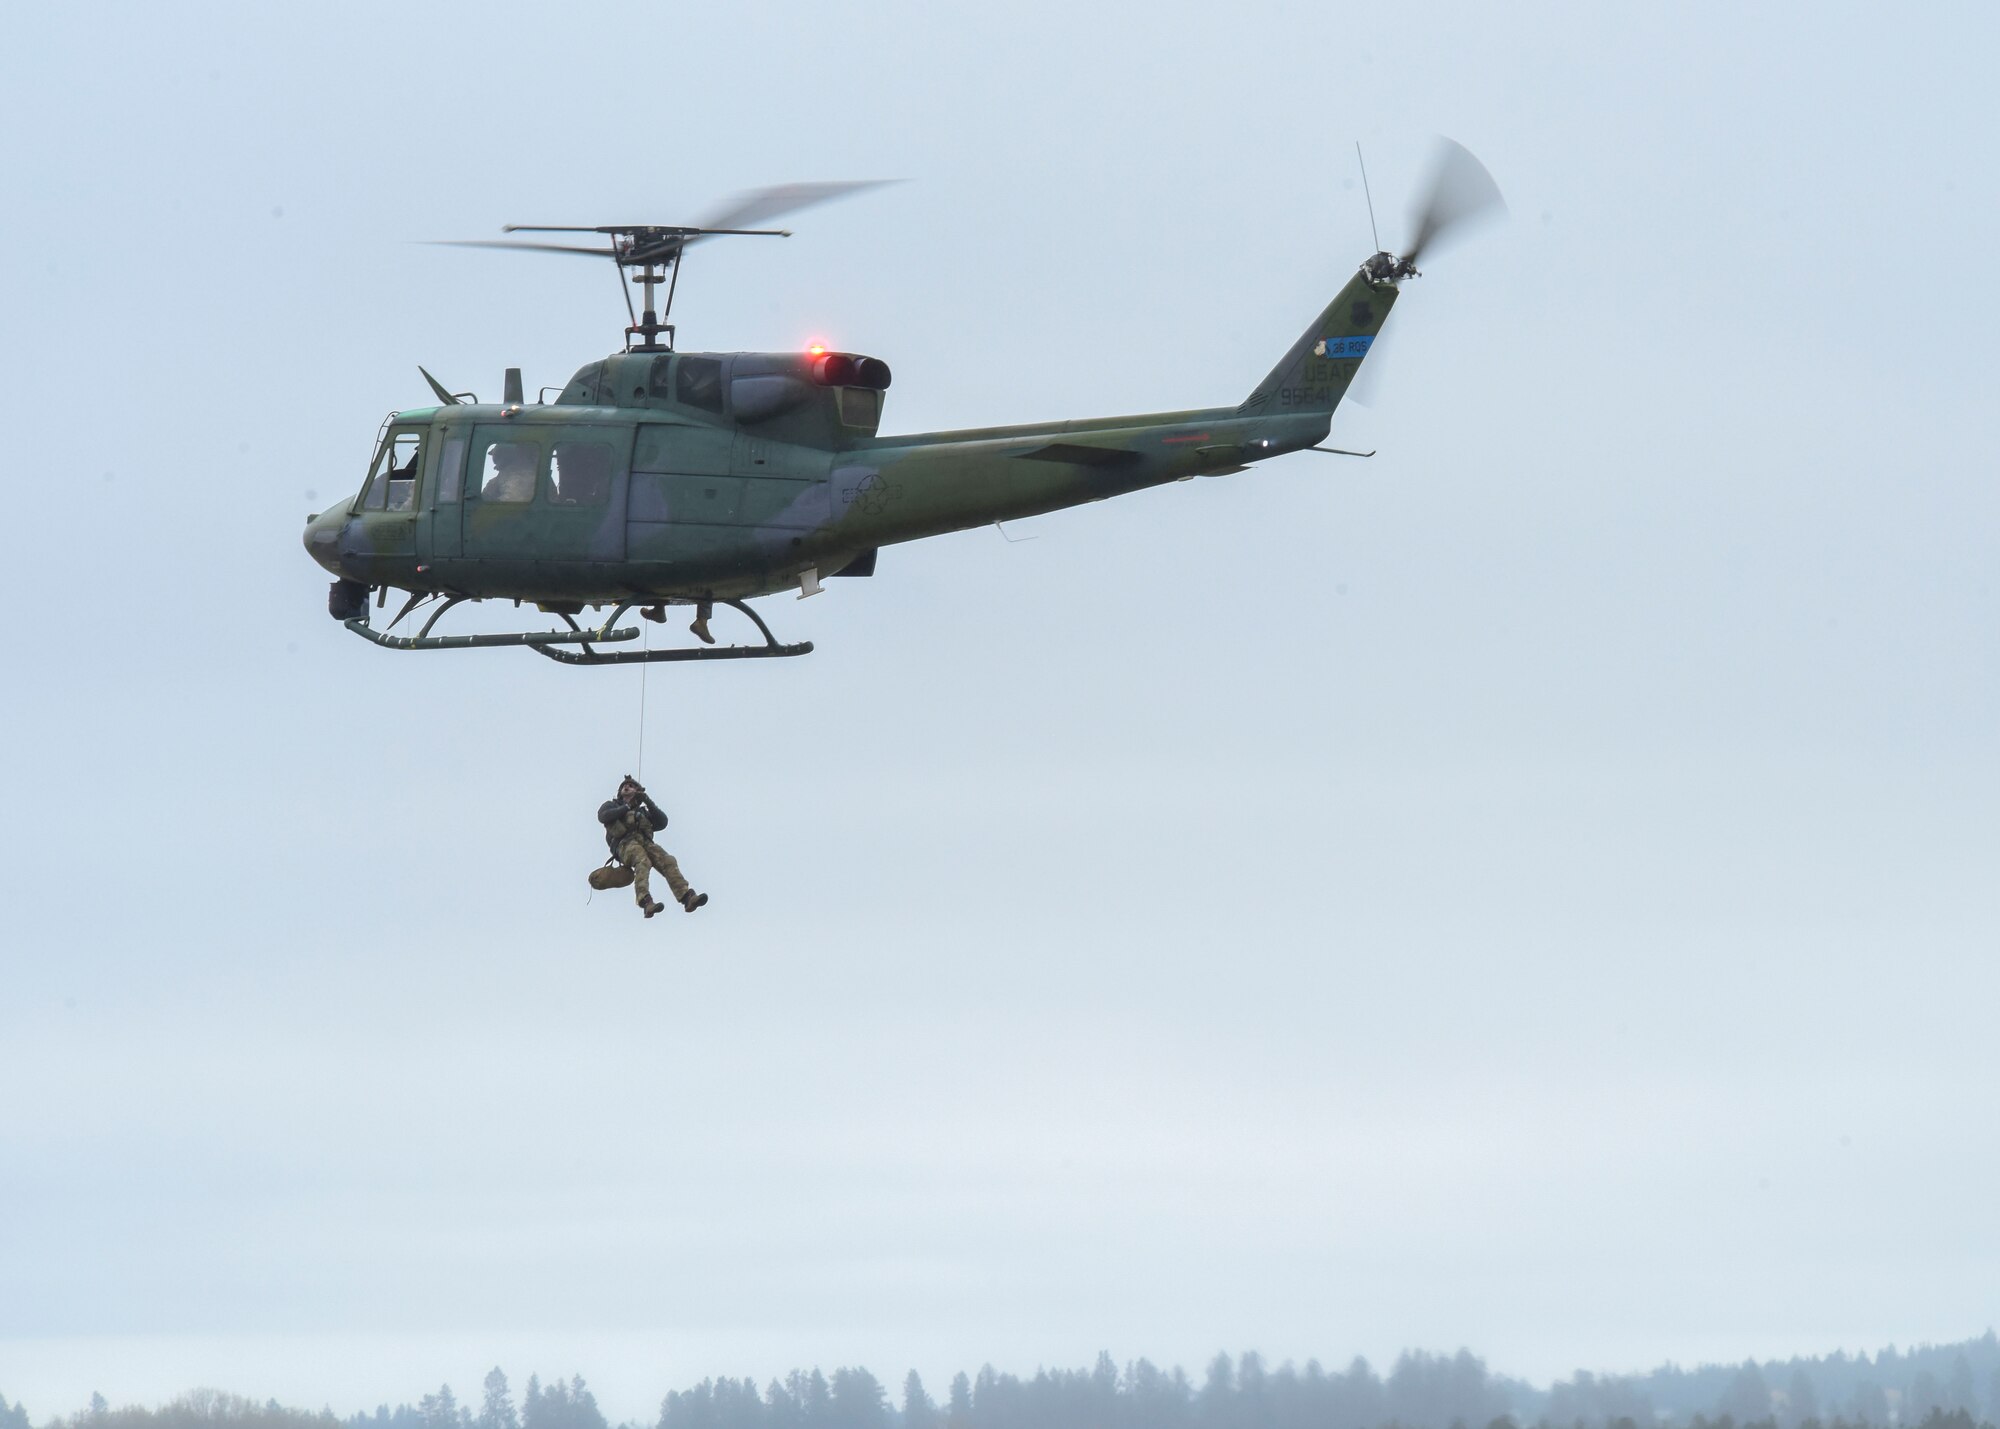 A U.S. Air Force Survival Evasion Resistance Escape Airman is hoisted up into a UH-1 Huey helicopter for a SERE demonstration during Skyfest 2022 at Fairchild Air Force Base, Washington, May 14, 2022. Fairchild Skyfest 2022 offered a unique view of Team Fairchild's role in enabling Rapid Global Mobility for the U.S. Air Force. (U.S. Air Force photo by Senior Airman Anneliese Kaiser)